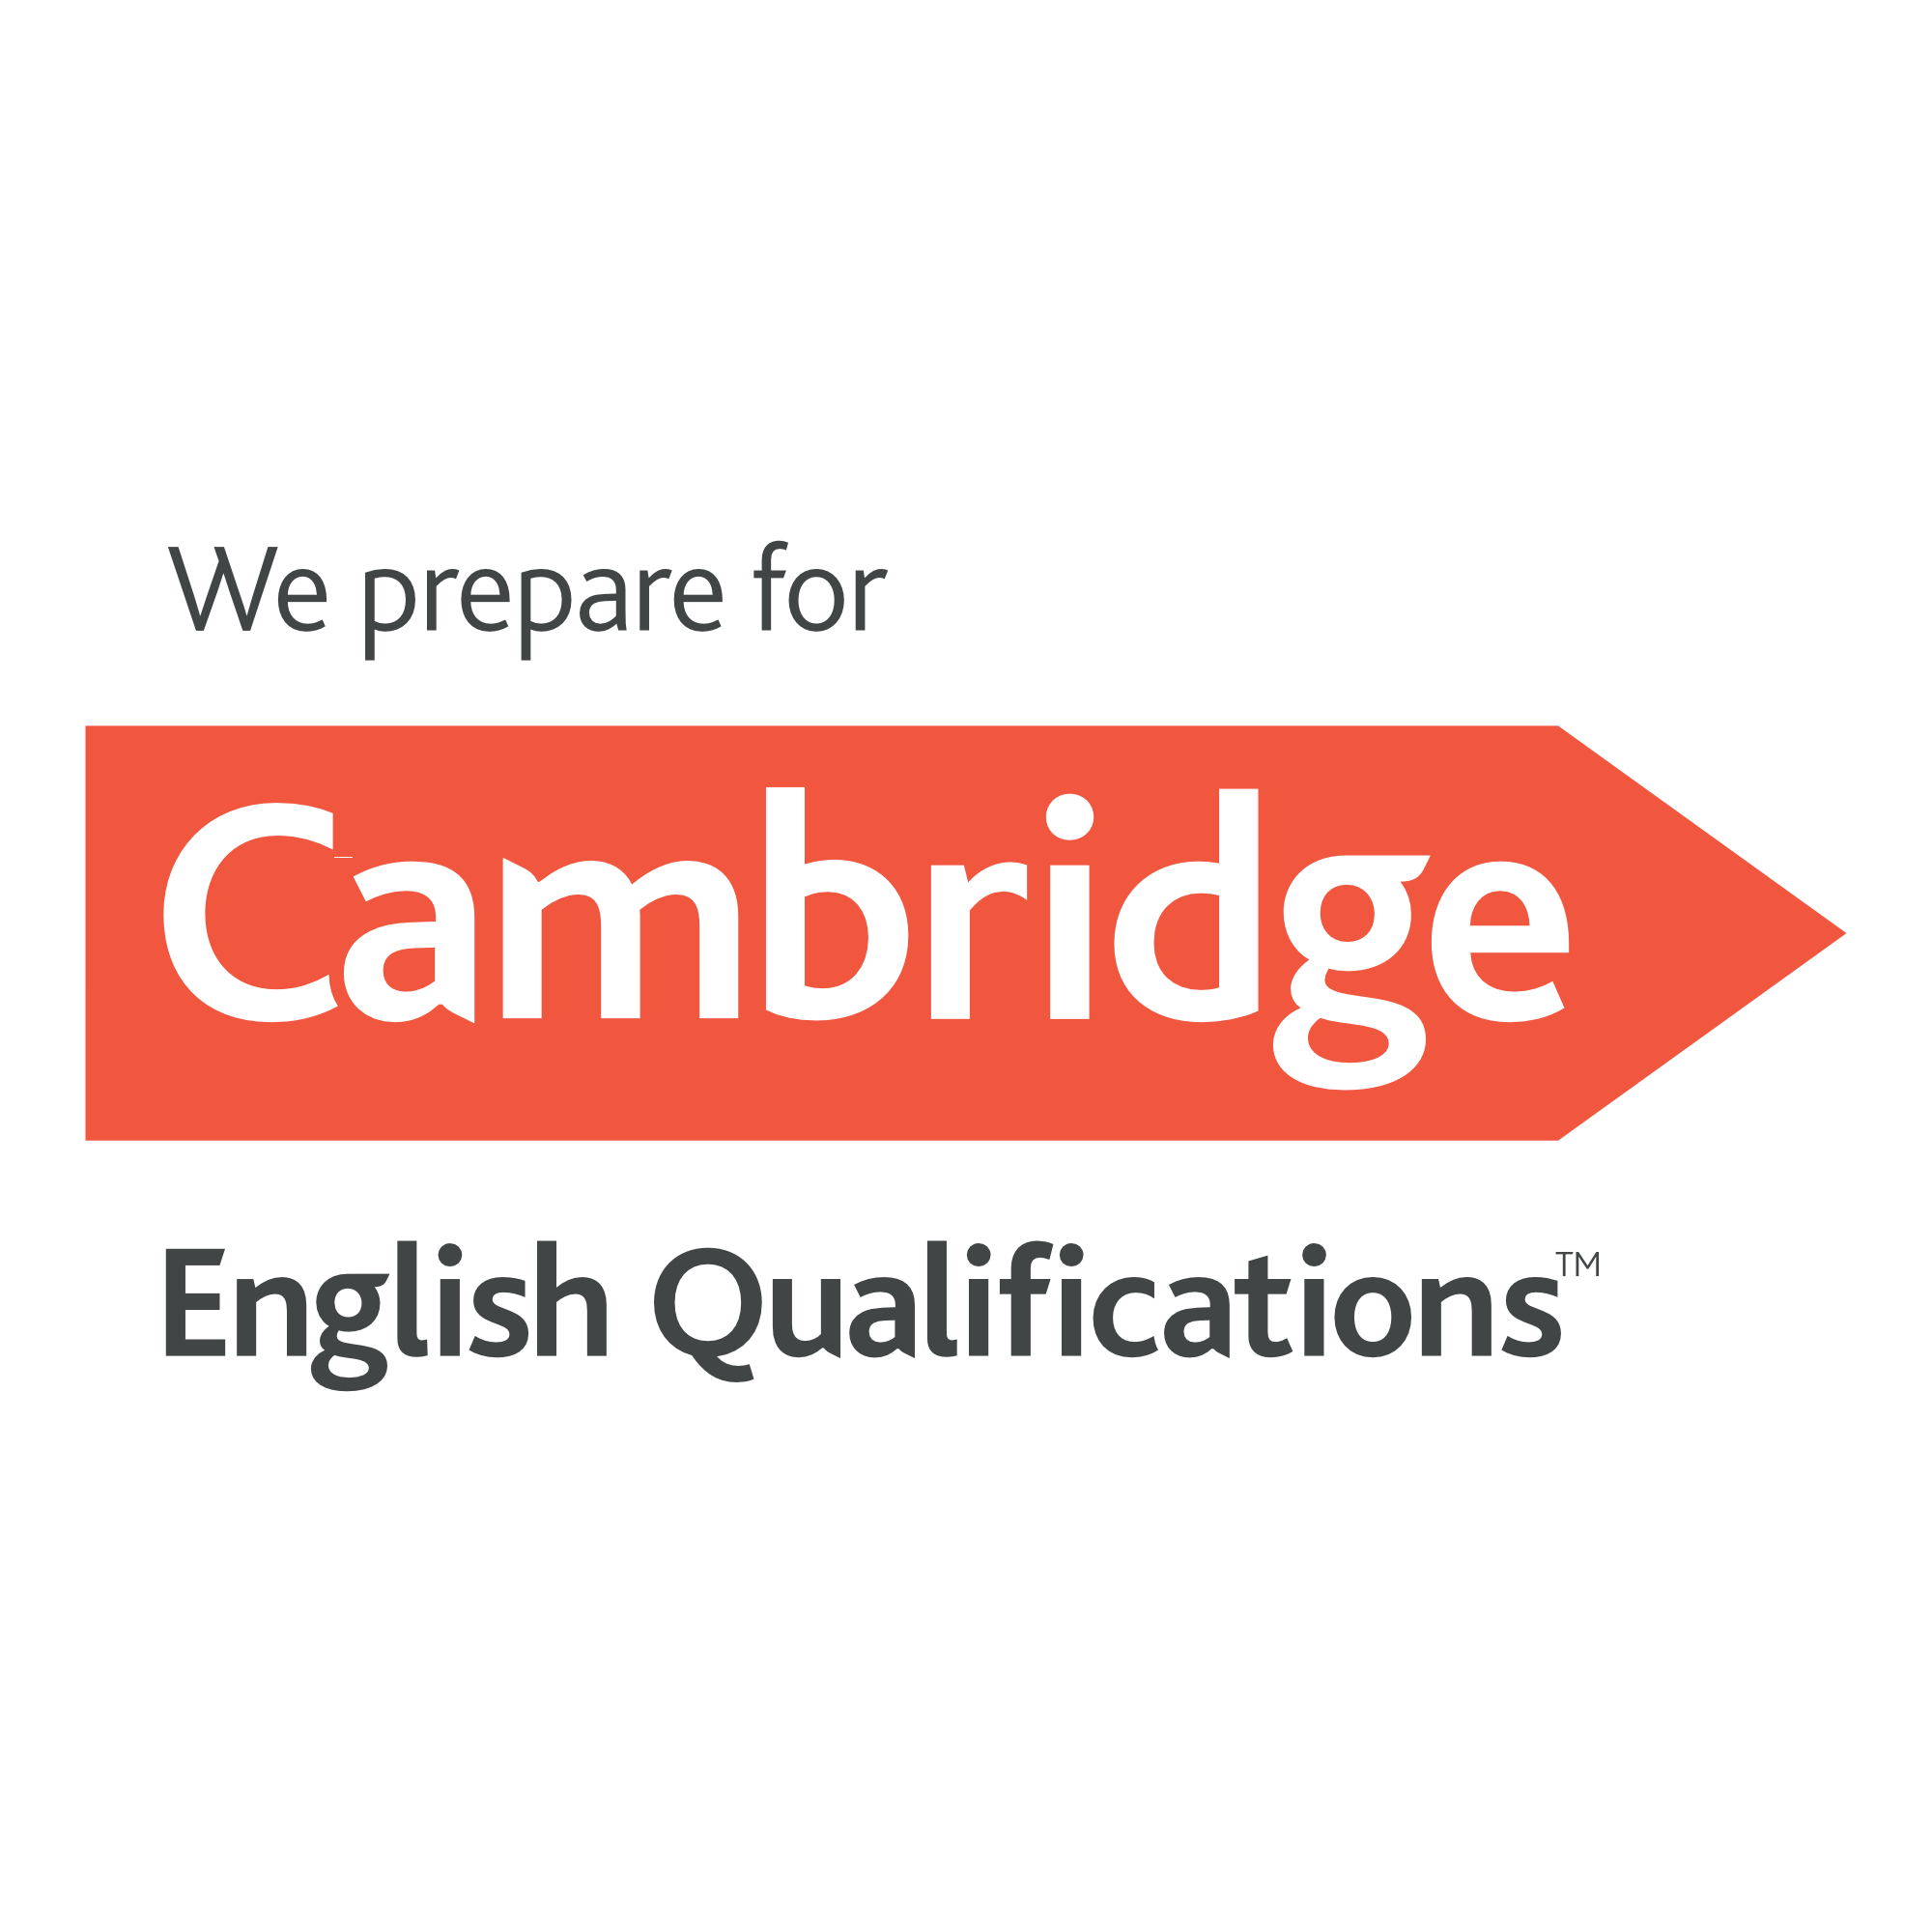 We prepare for Cambdige English Qualifications